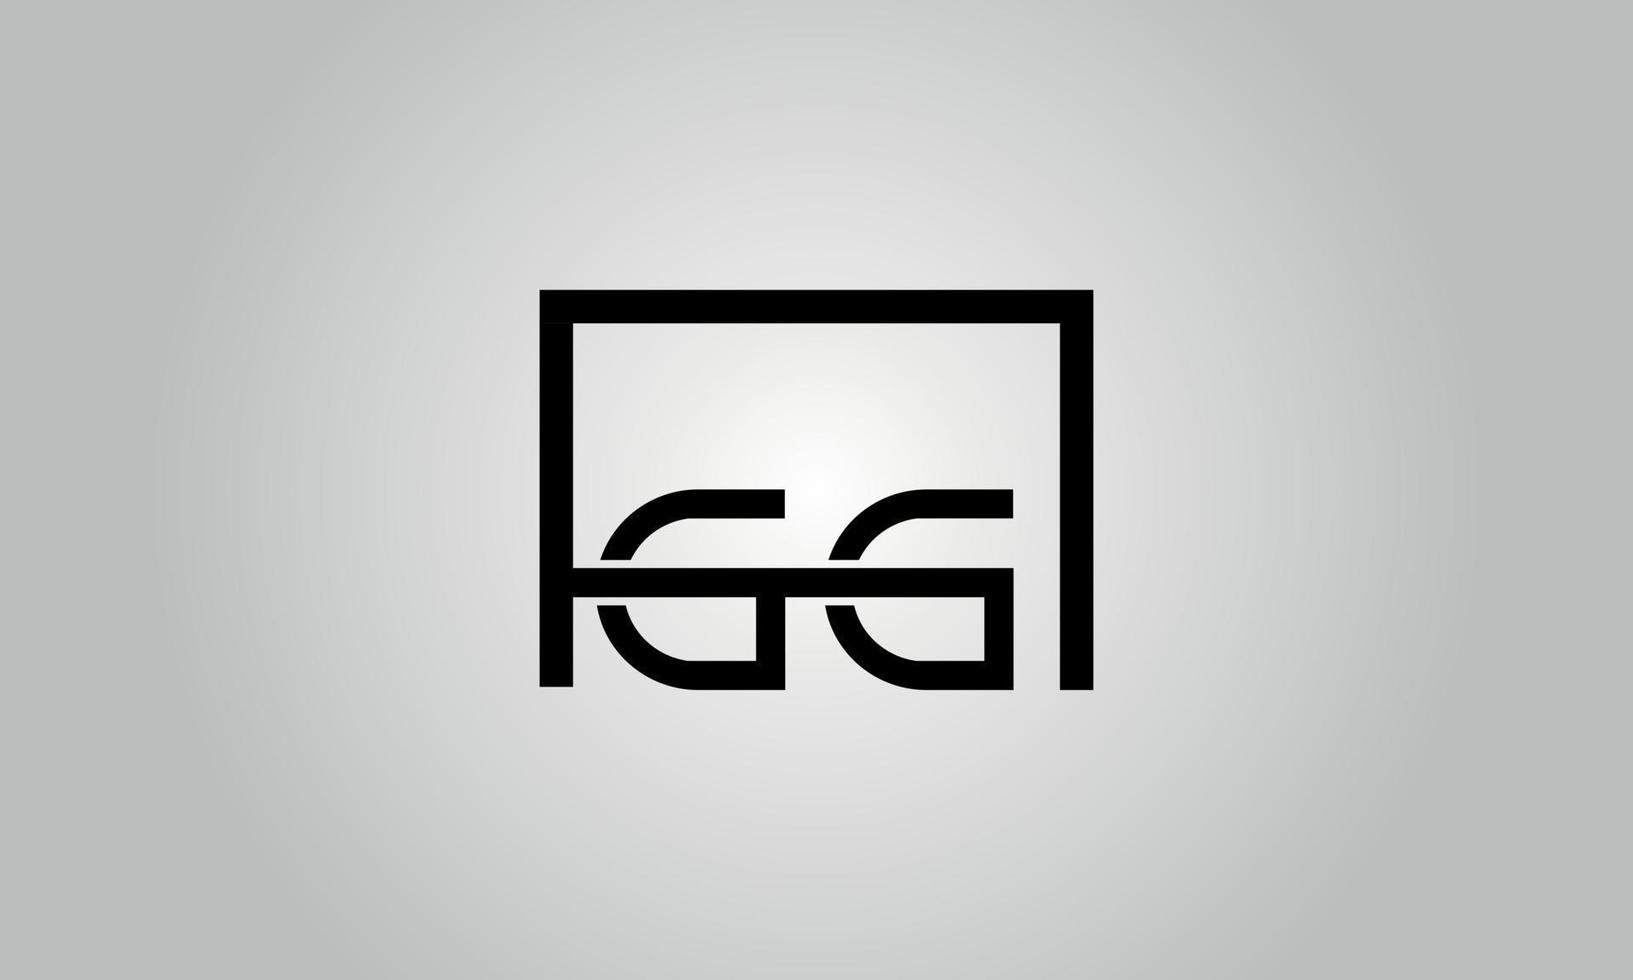 Letter GG logo design. GG logo with square shape in black colors vector free vector template.